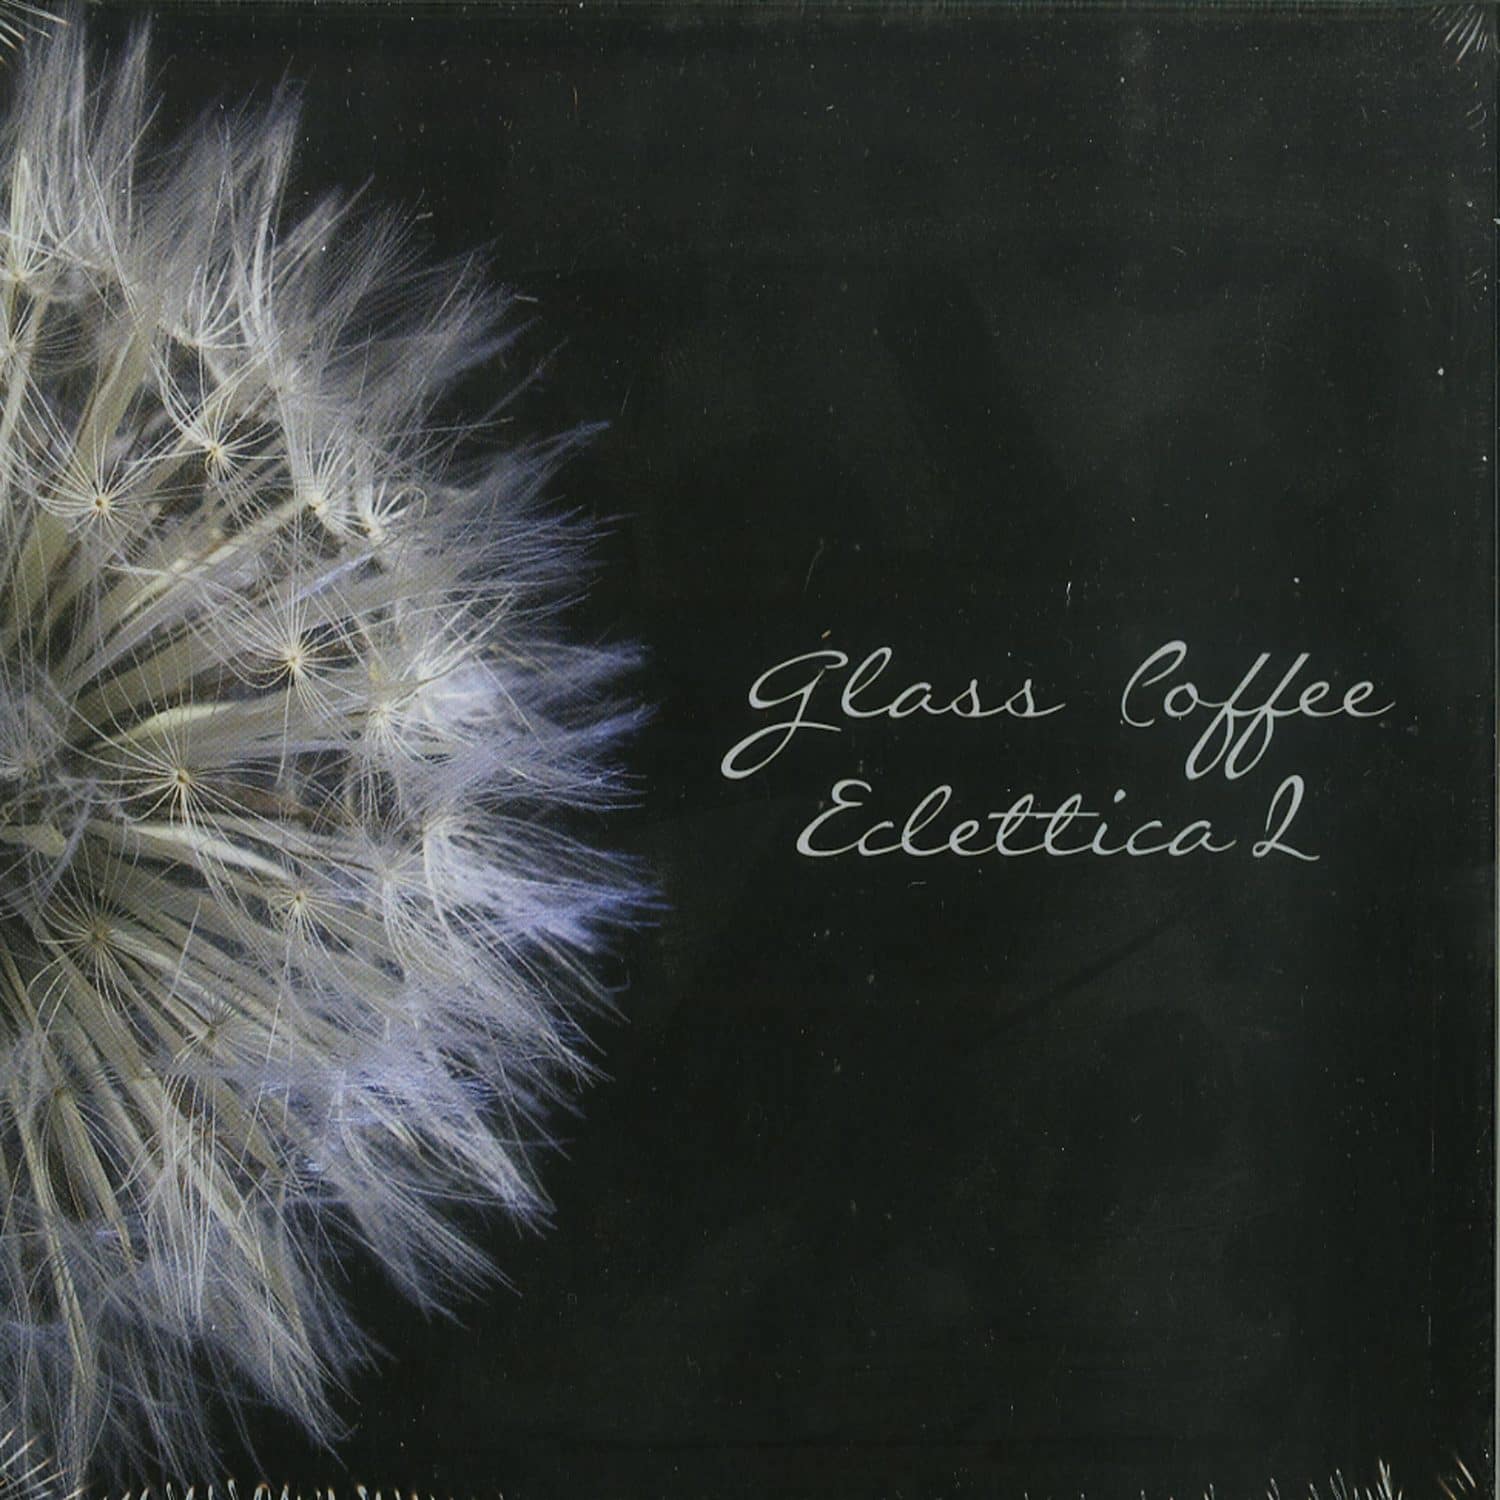 Various Artists - ECLETTICA 2 BY GLASS COFFEE 